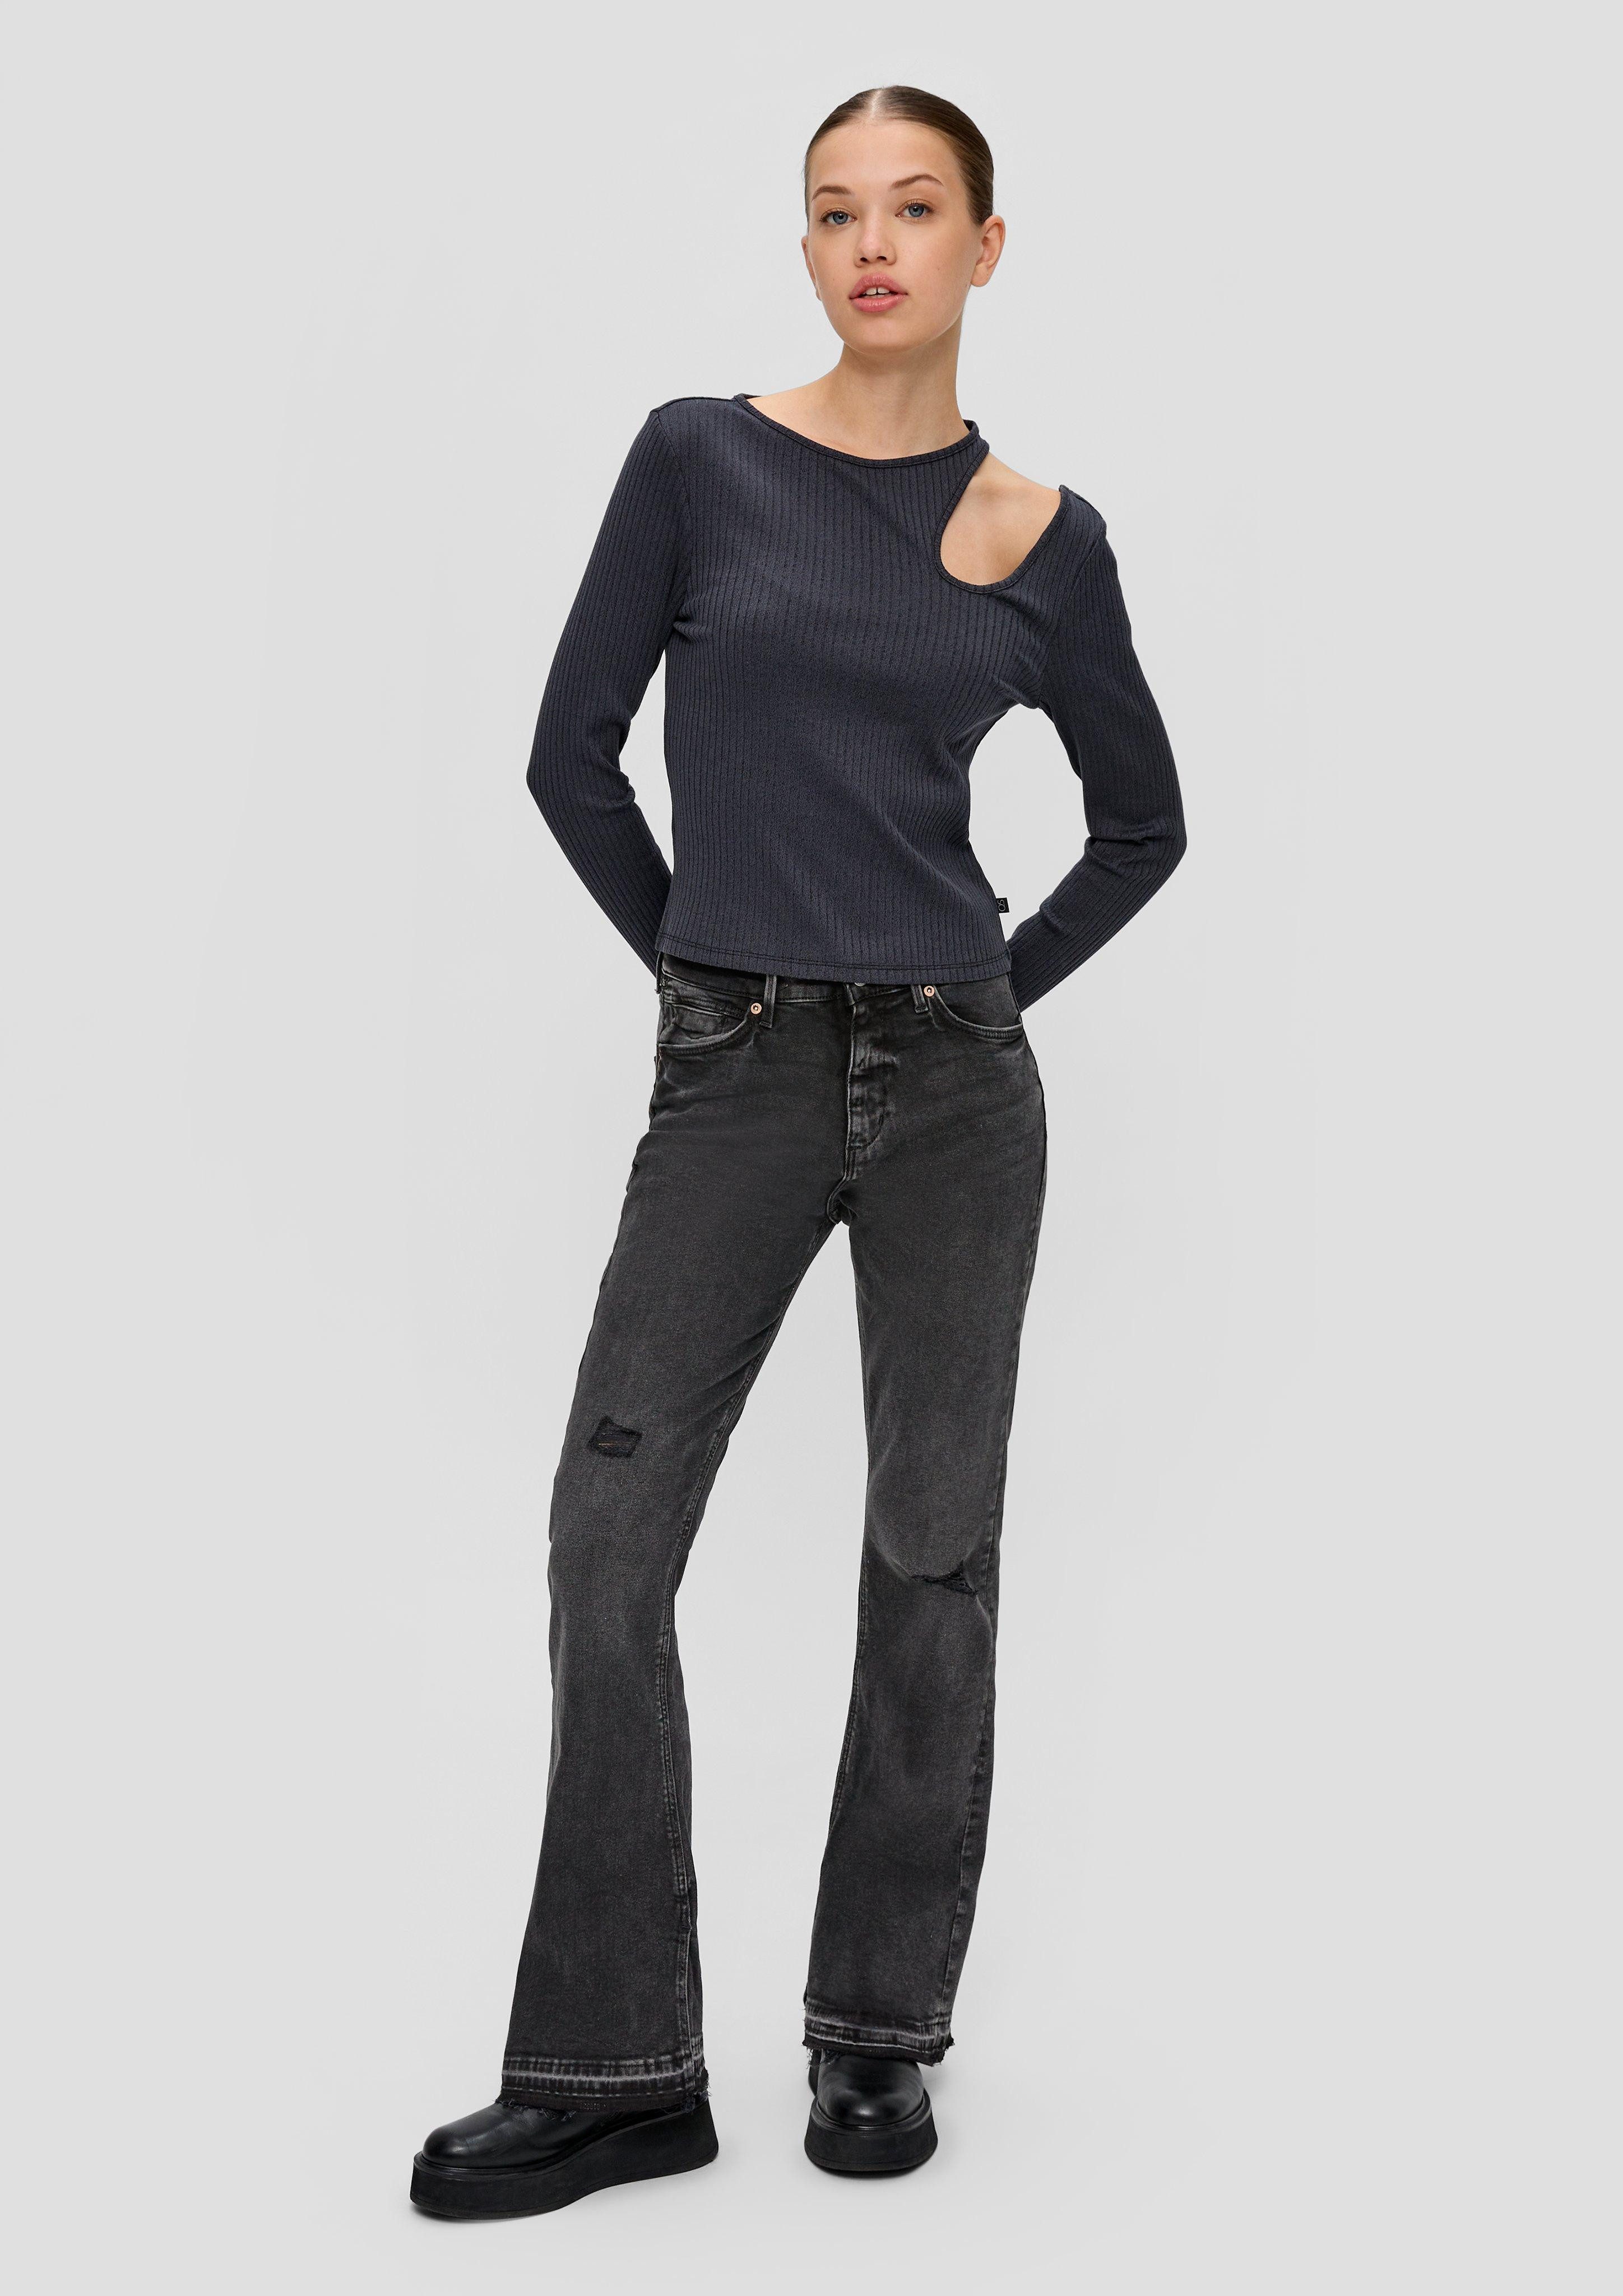 QS 5-Pocket-Jeans Jeans Reena / Slim Fit / High Rise / Flared Leg Waschung, Destroyes